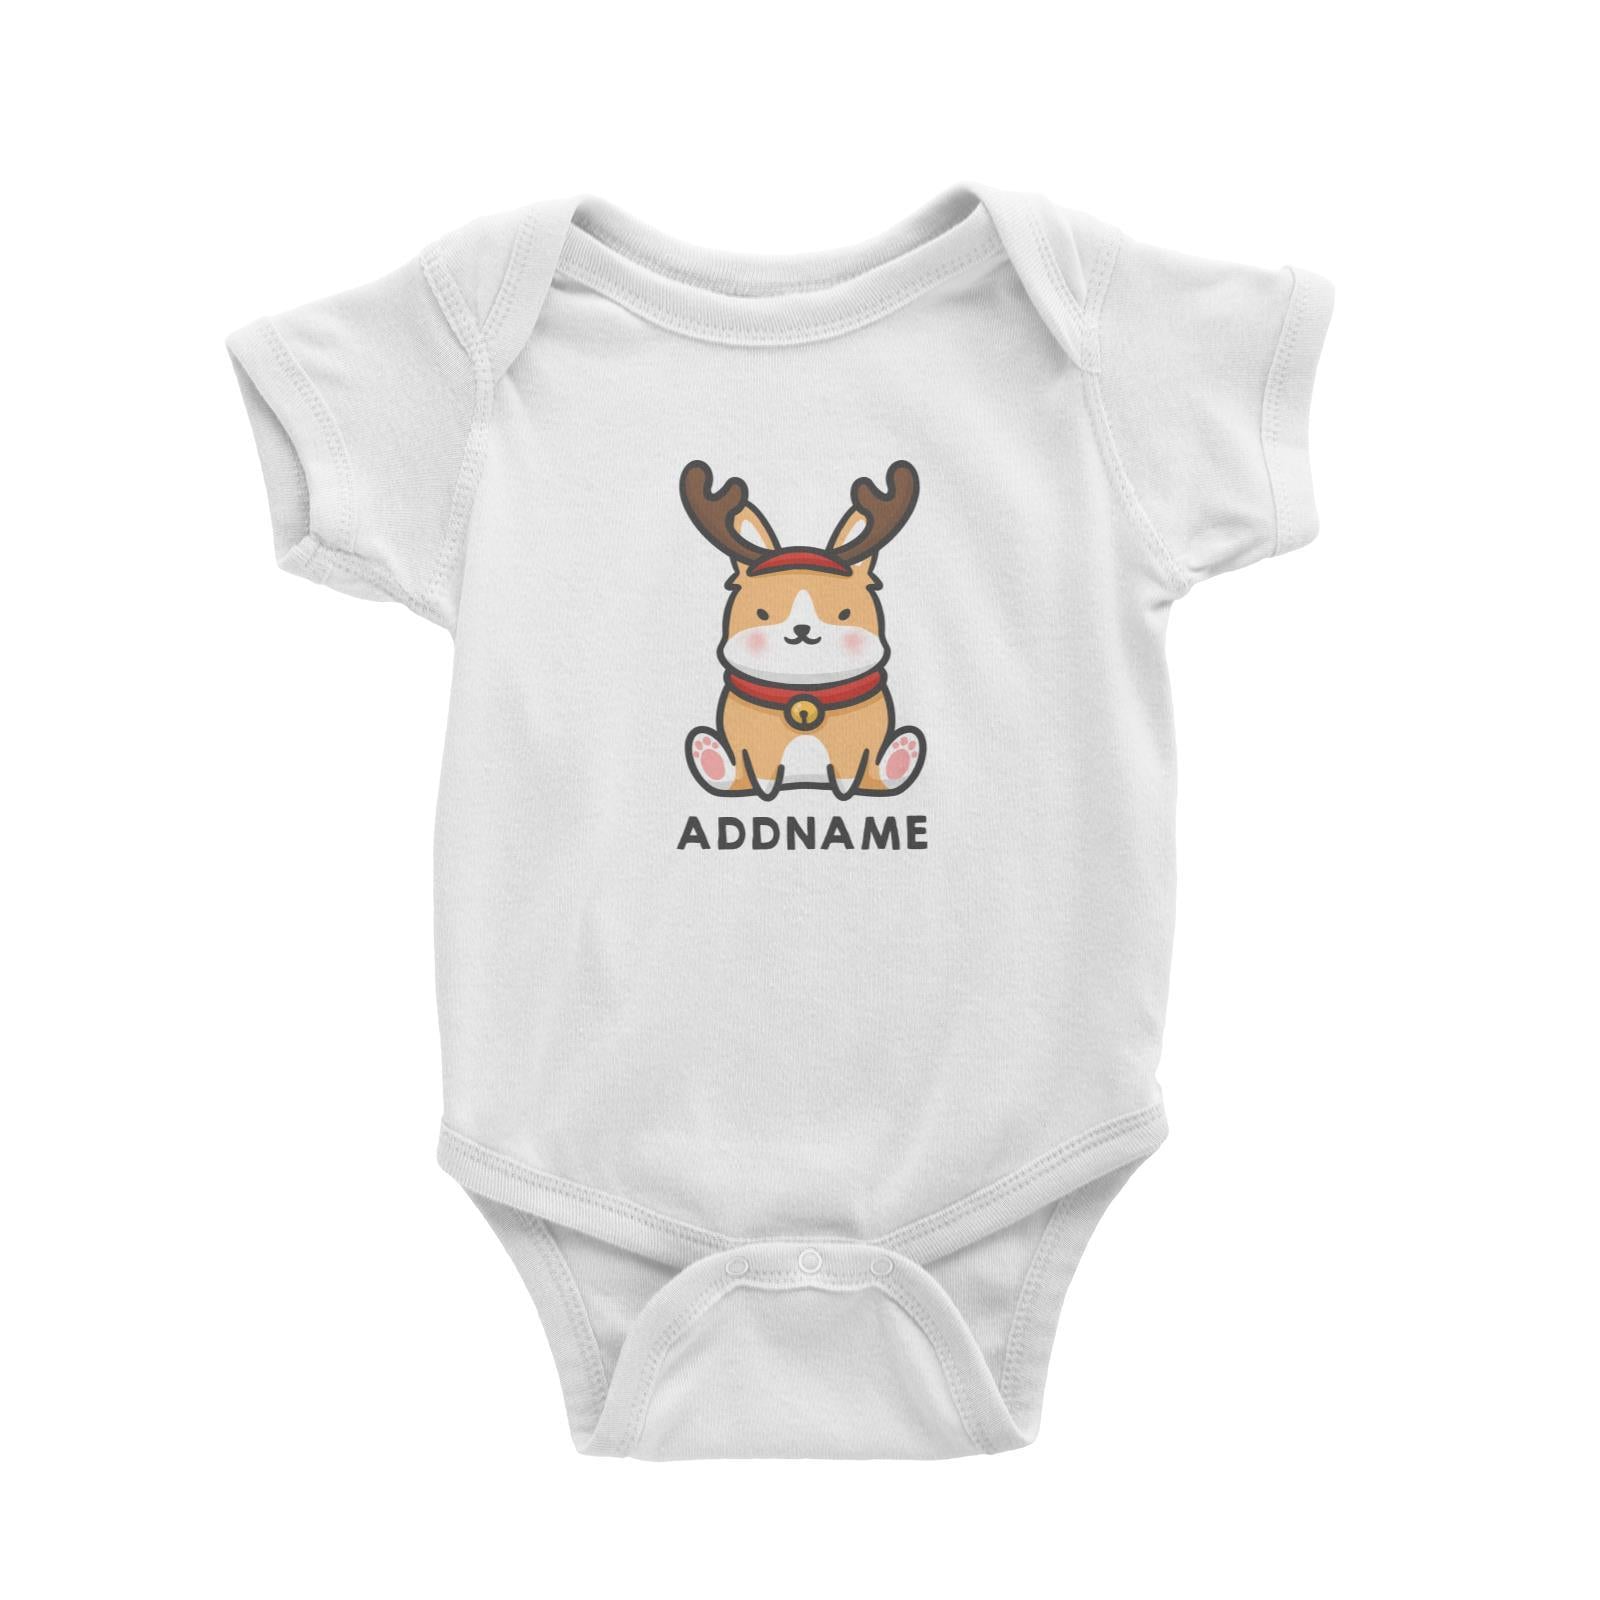 Xmas Cute Dog With Reindeer Antlers Addname Accessories Baby Romper